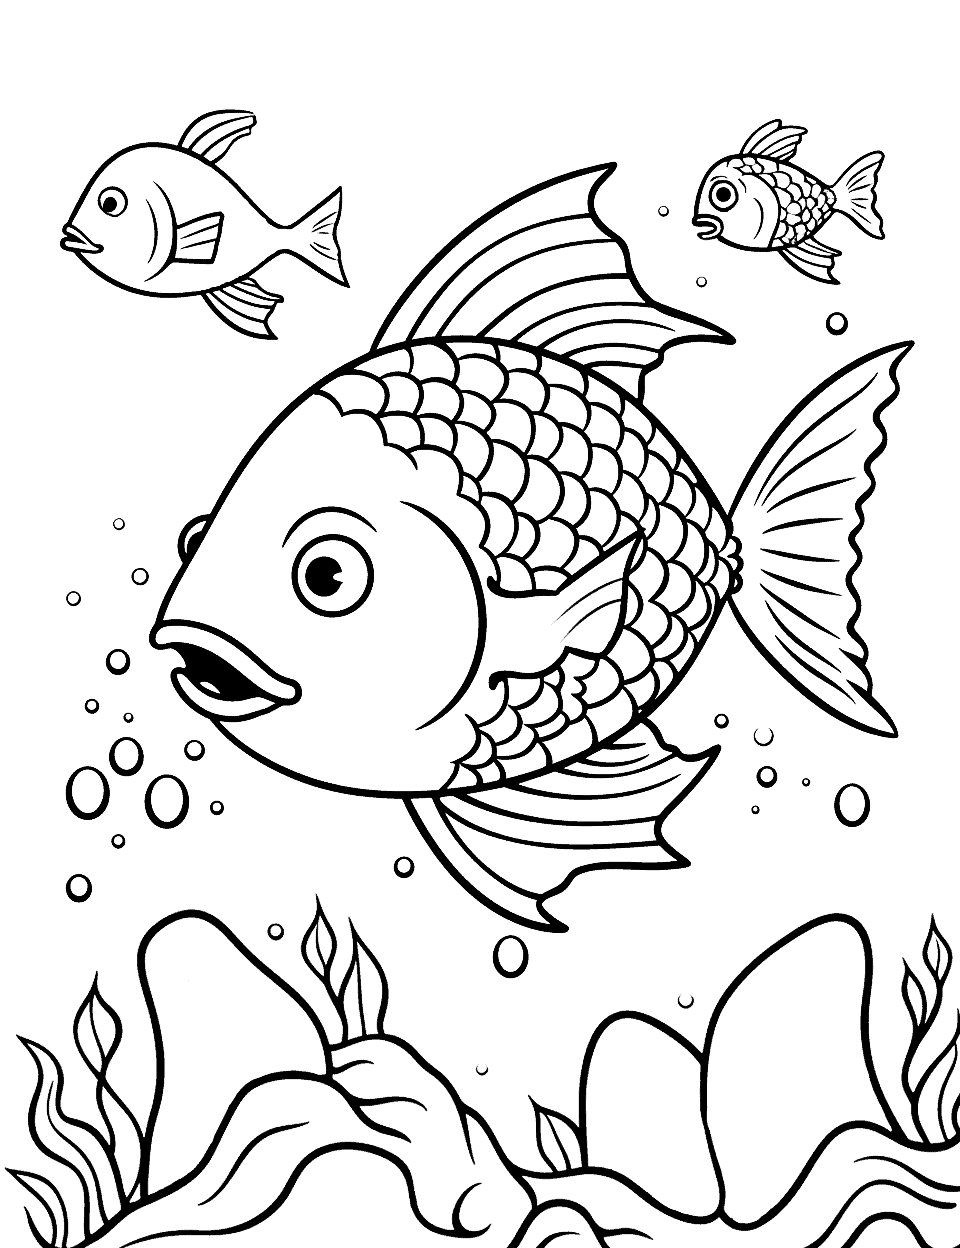 Fish Danger Trip Coloring Page - Fish around a volcanic vent.